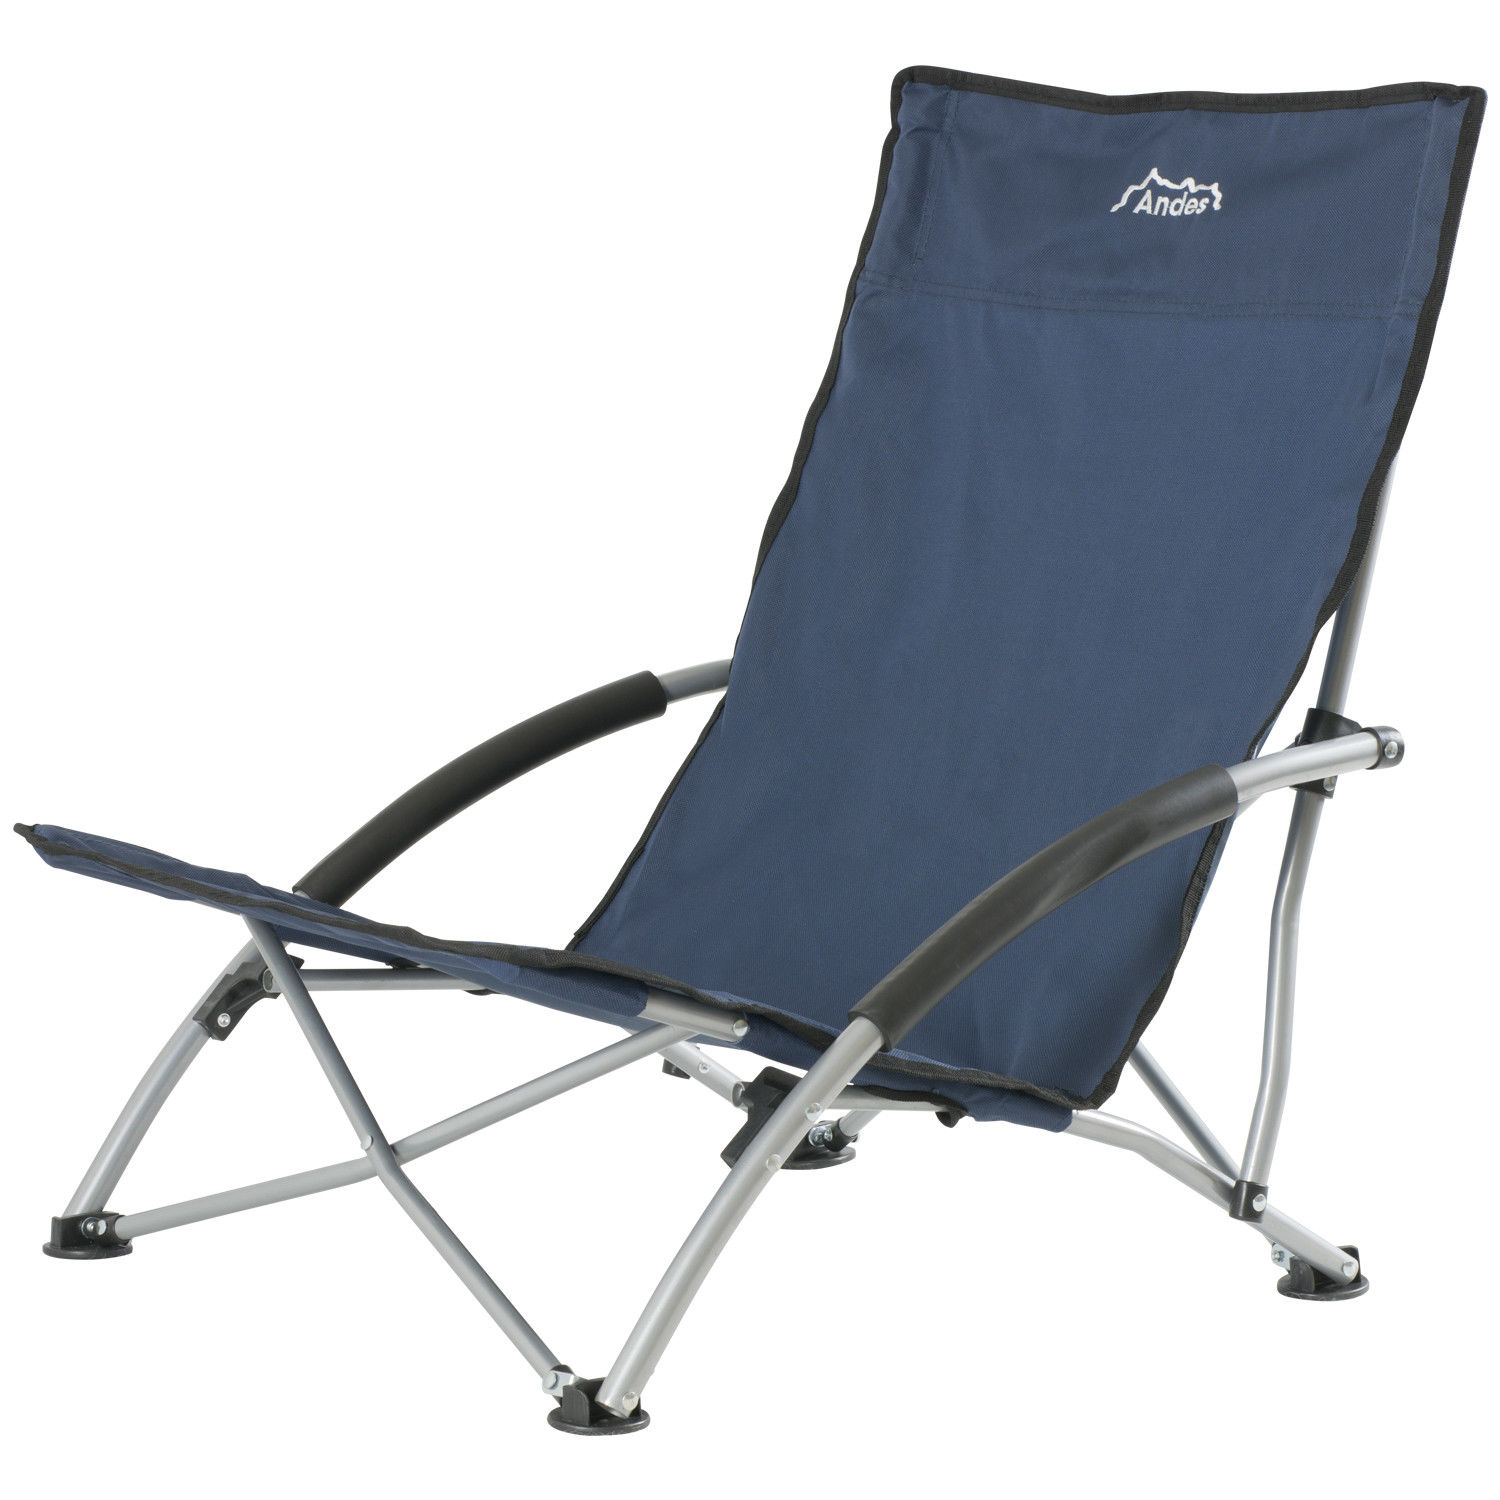 Andes Low Folding Beach/Fishing/Camping Deck Chair Outdoor ...